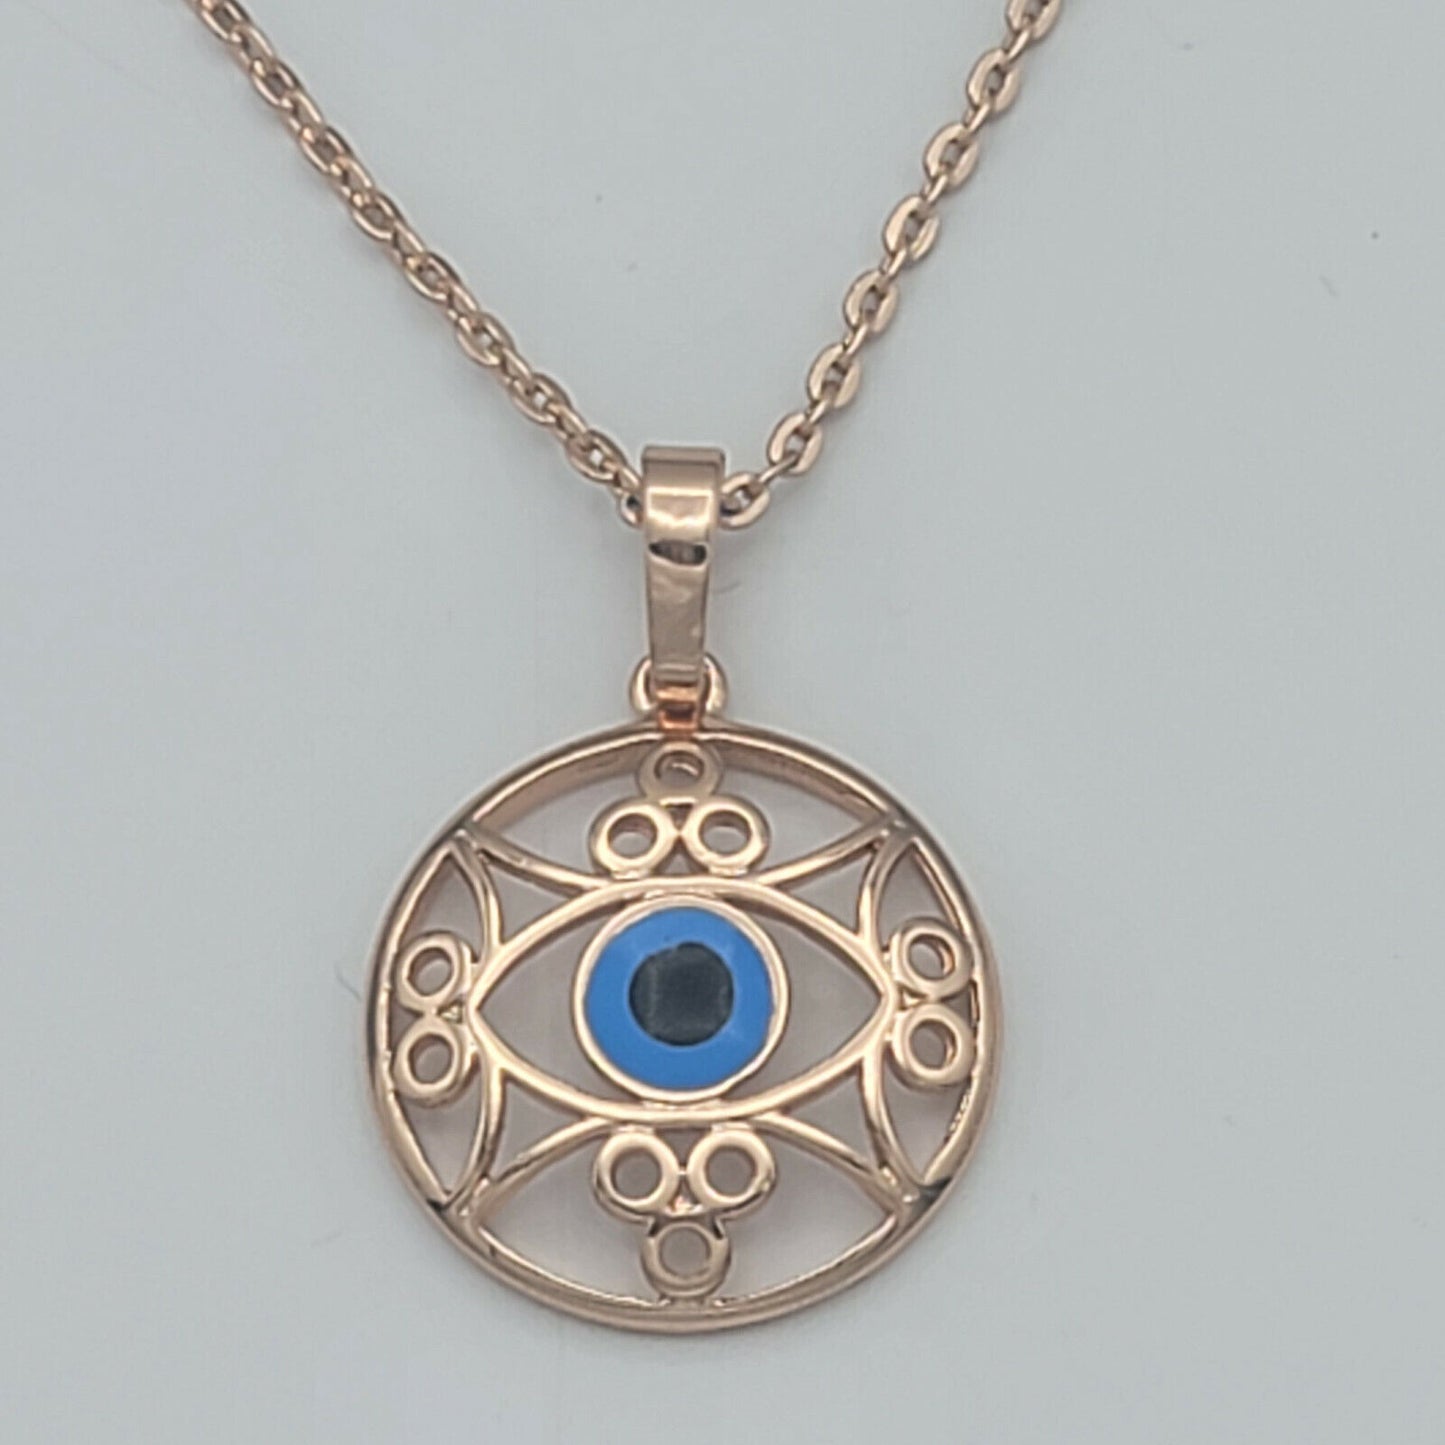 Necklaces - Rose Gold Plated. Blue Eye Pendant & Chain.